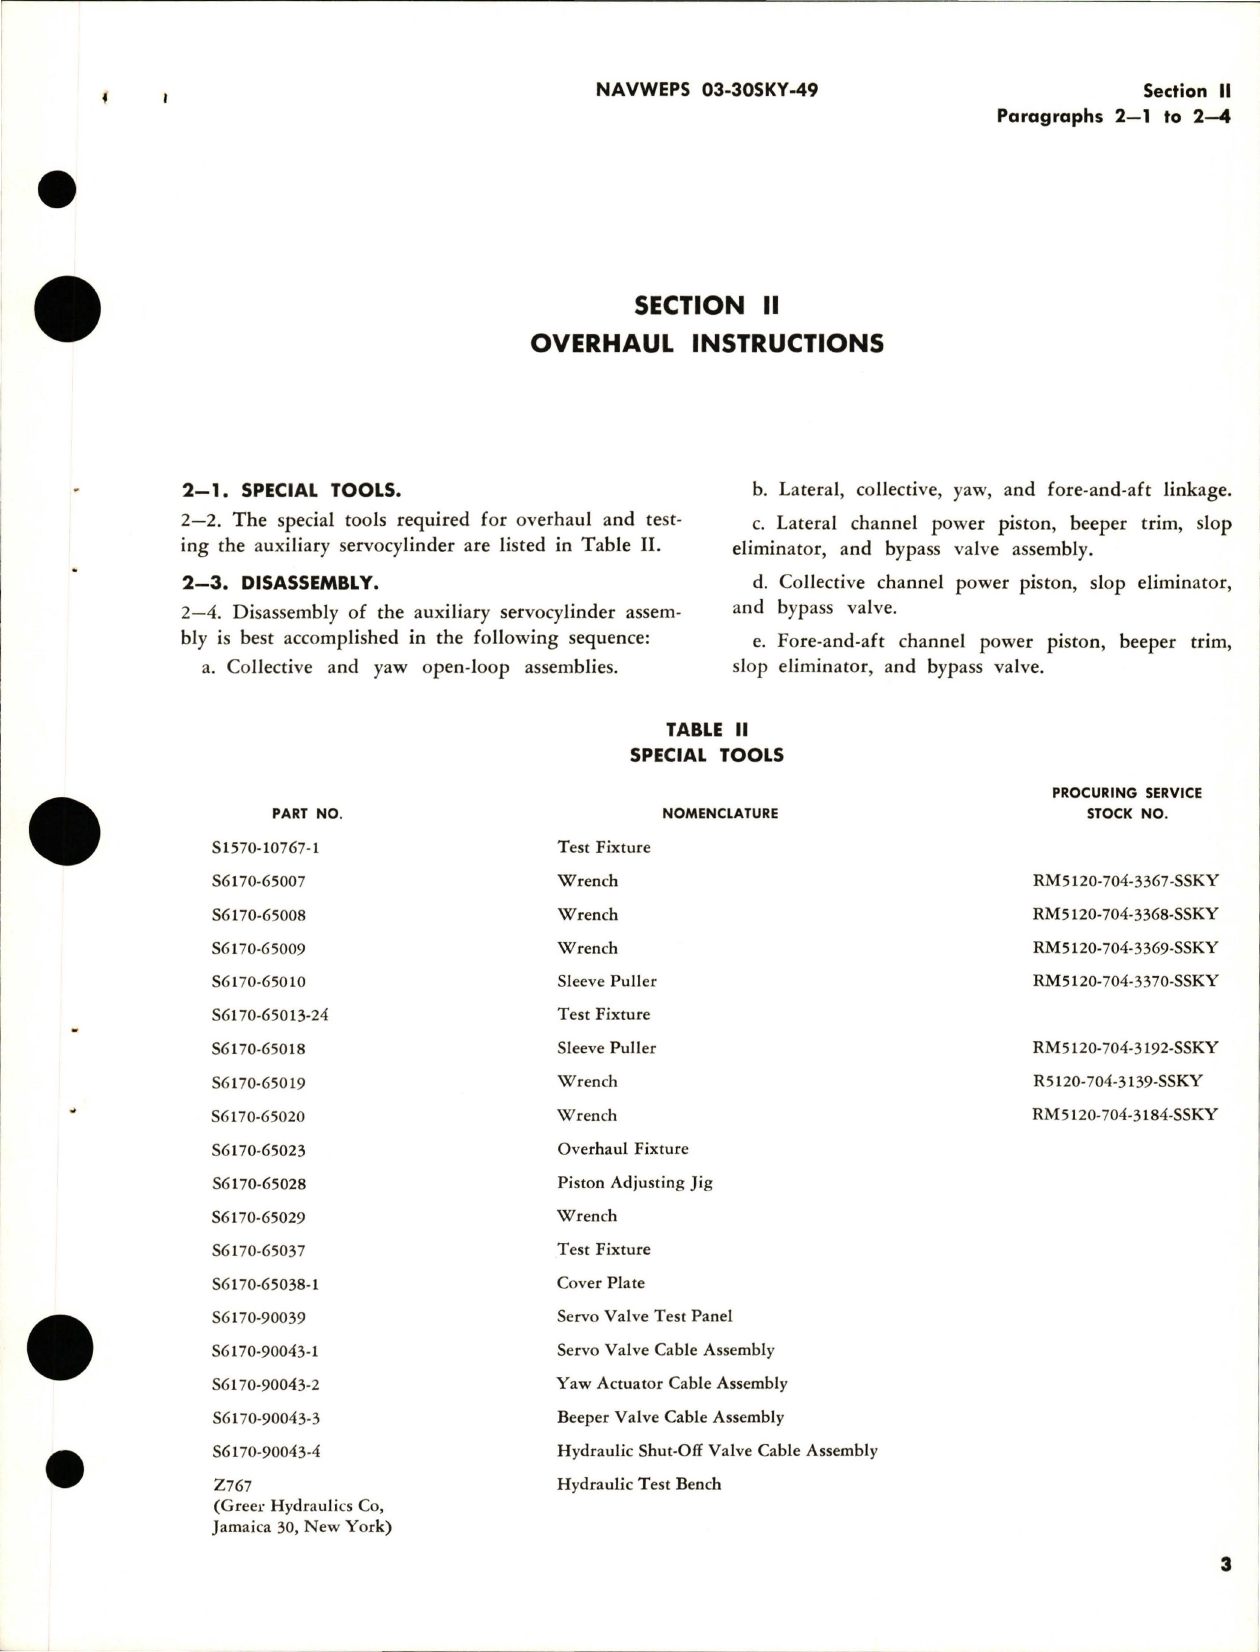 Sample page 7 from AirCorps Library document: Overhaul Instructions for Auxiliary Servocylinder Assembly - Part S6165-61500-7